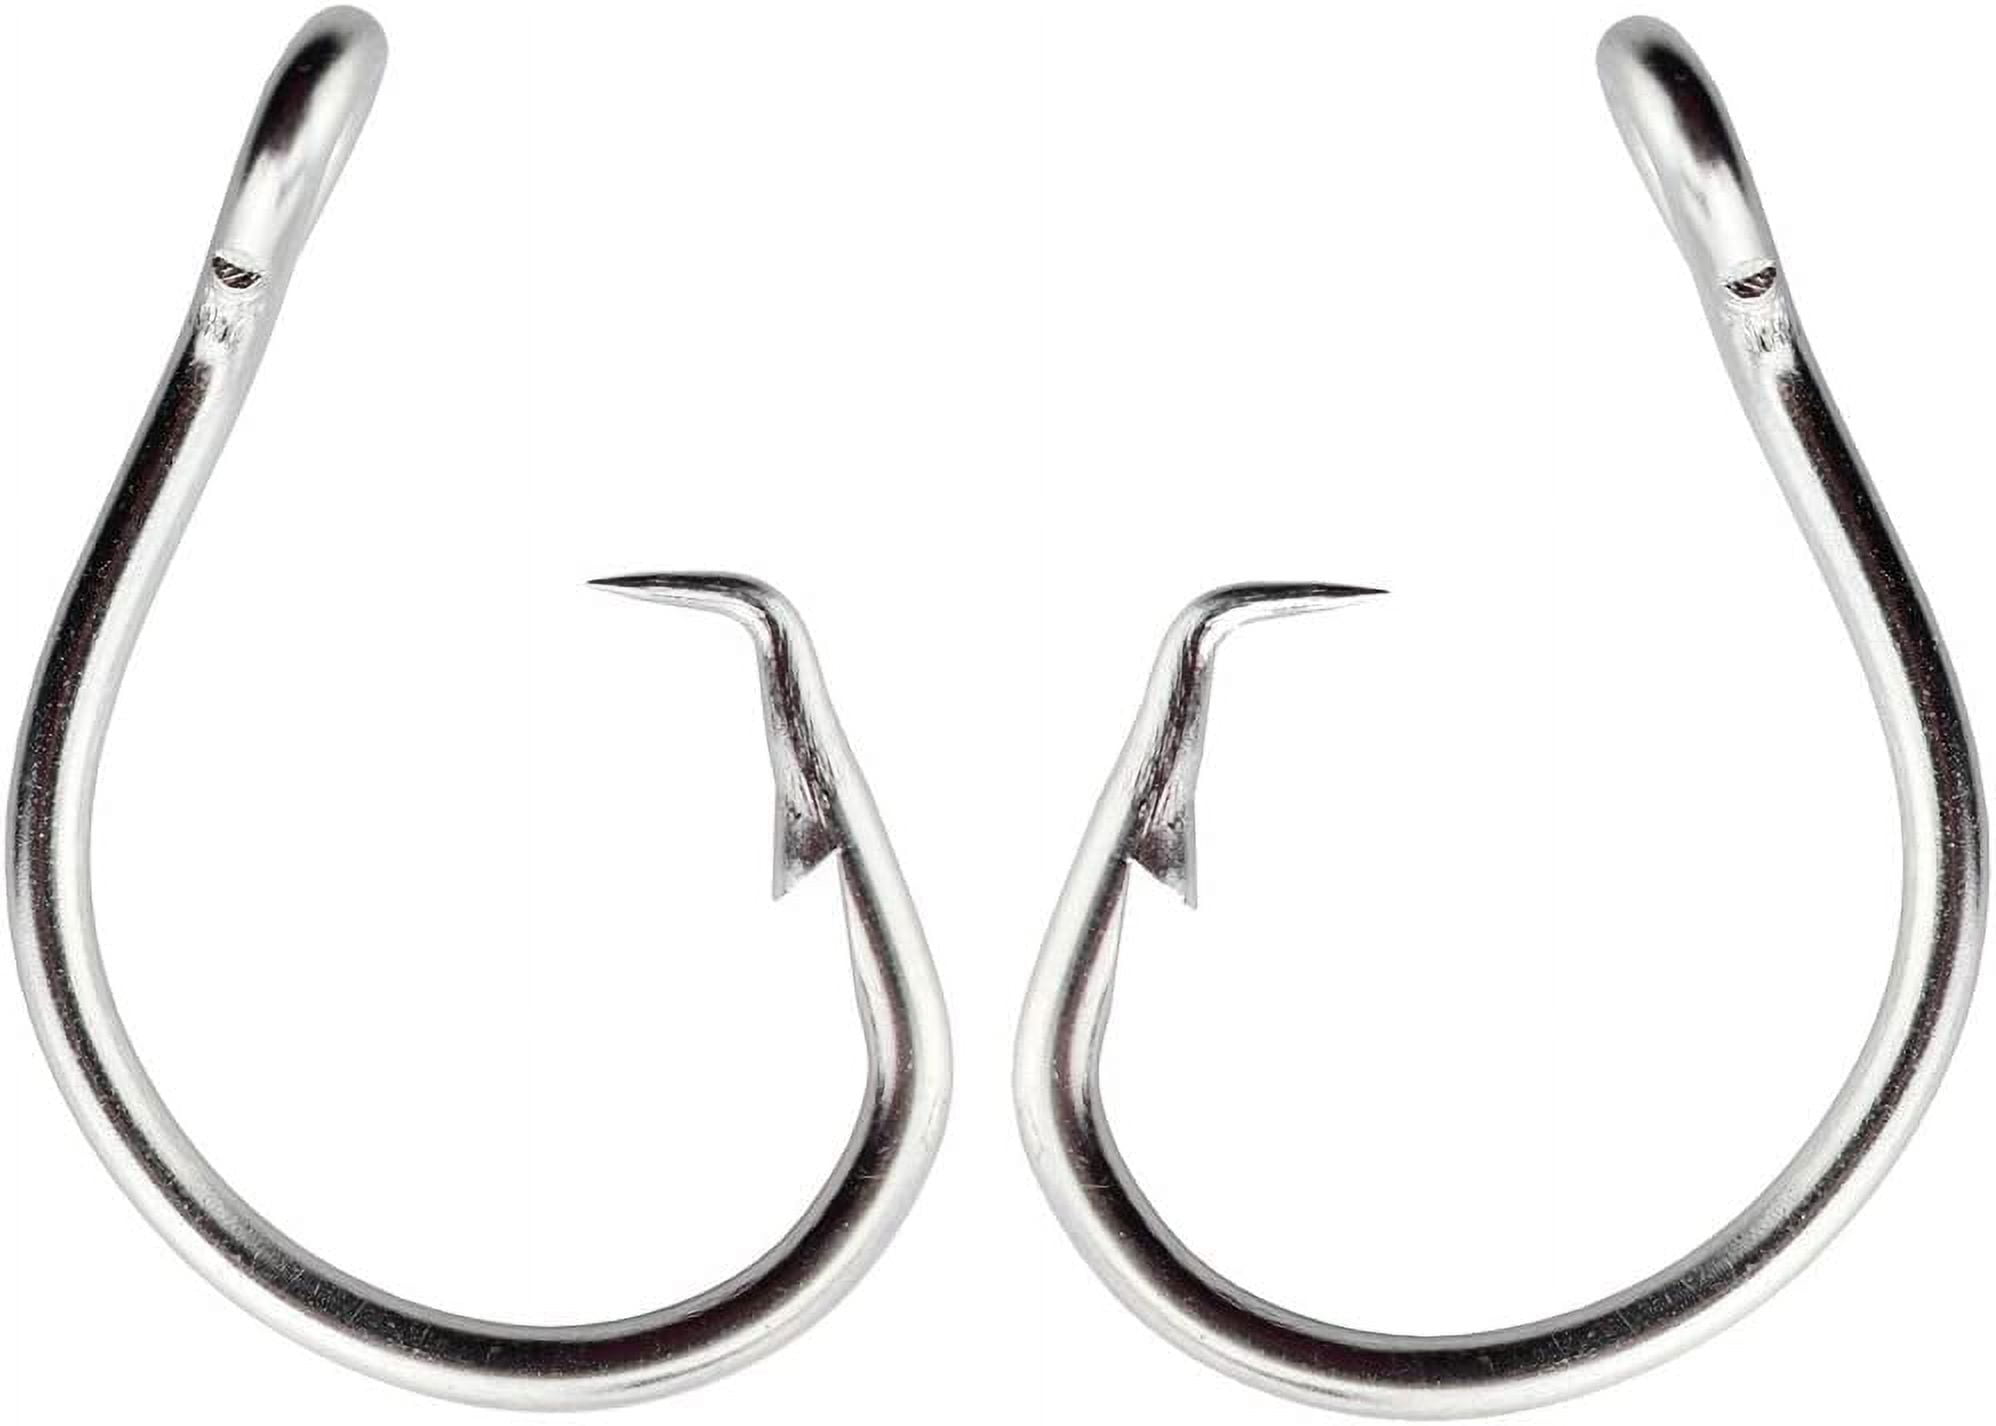 YOTO Circle Hook for Saltwater Freshwater Bass Tuna, 6-Pack Perfect in-line  Big Game Fishing Hook with 9 Size